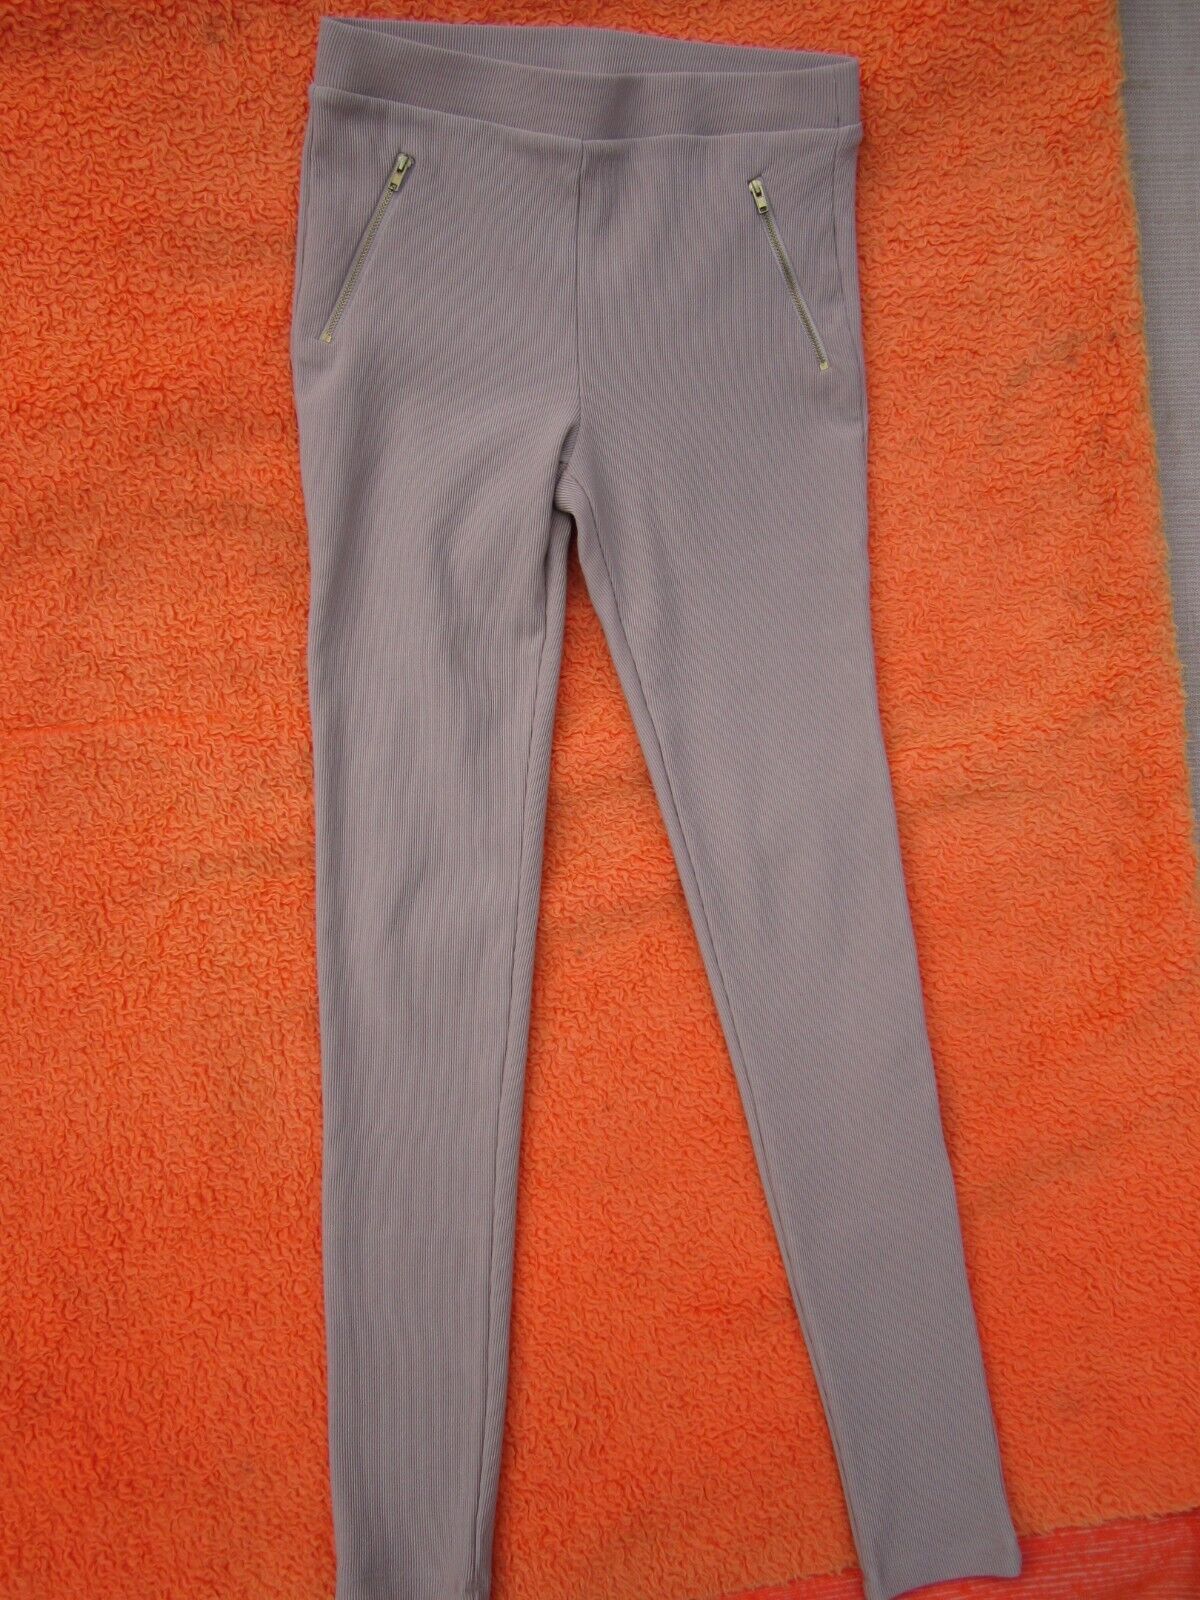 PAIR OF LADIES NEW PANTS FROM "FOREVER 21" IN SIZE MEDIUM